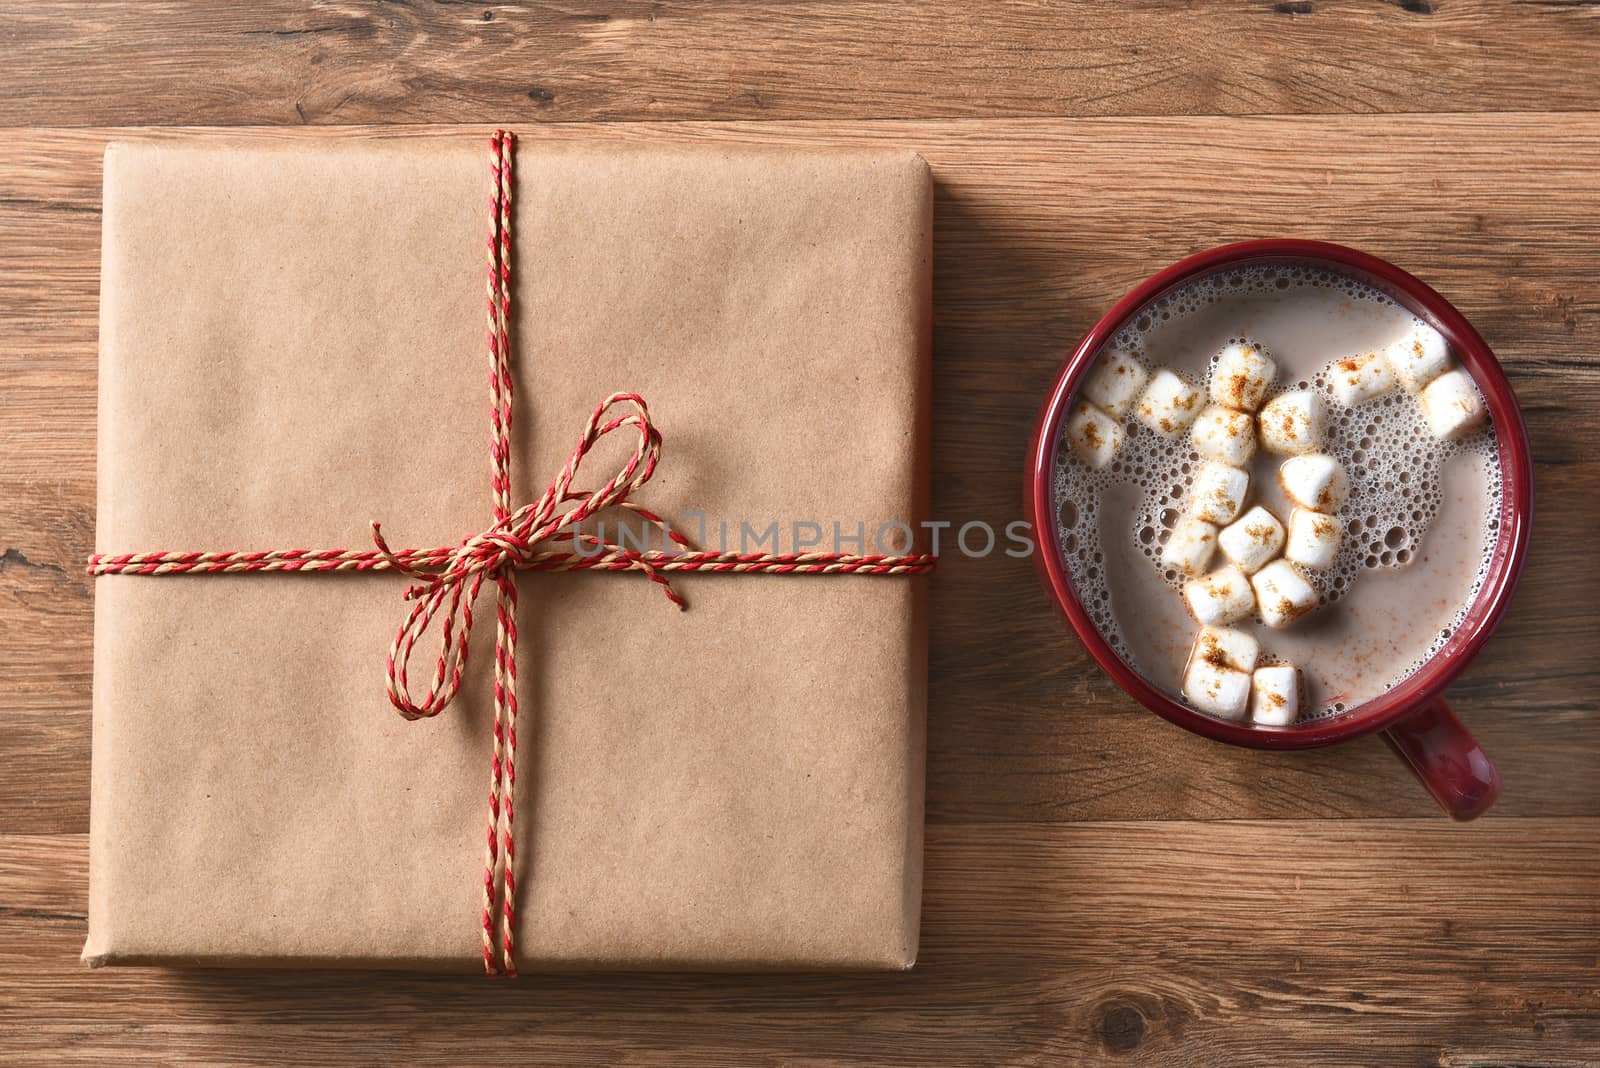 High angle view of a plain brown paper wrapped Christmas Present next to a large mug of hot cocoa with marshmallows.